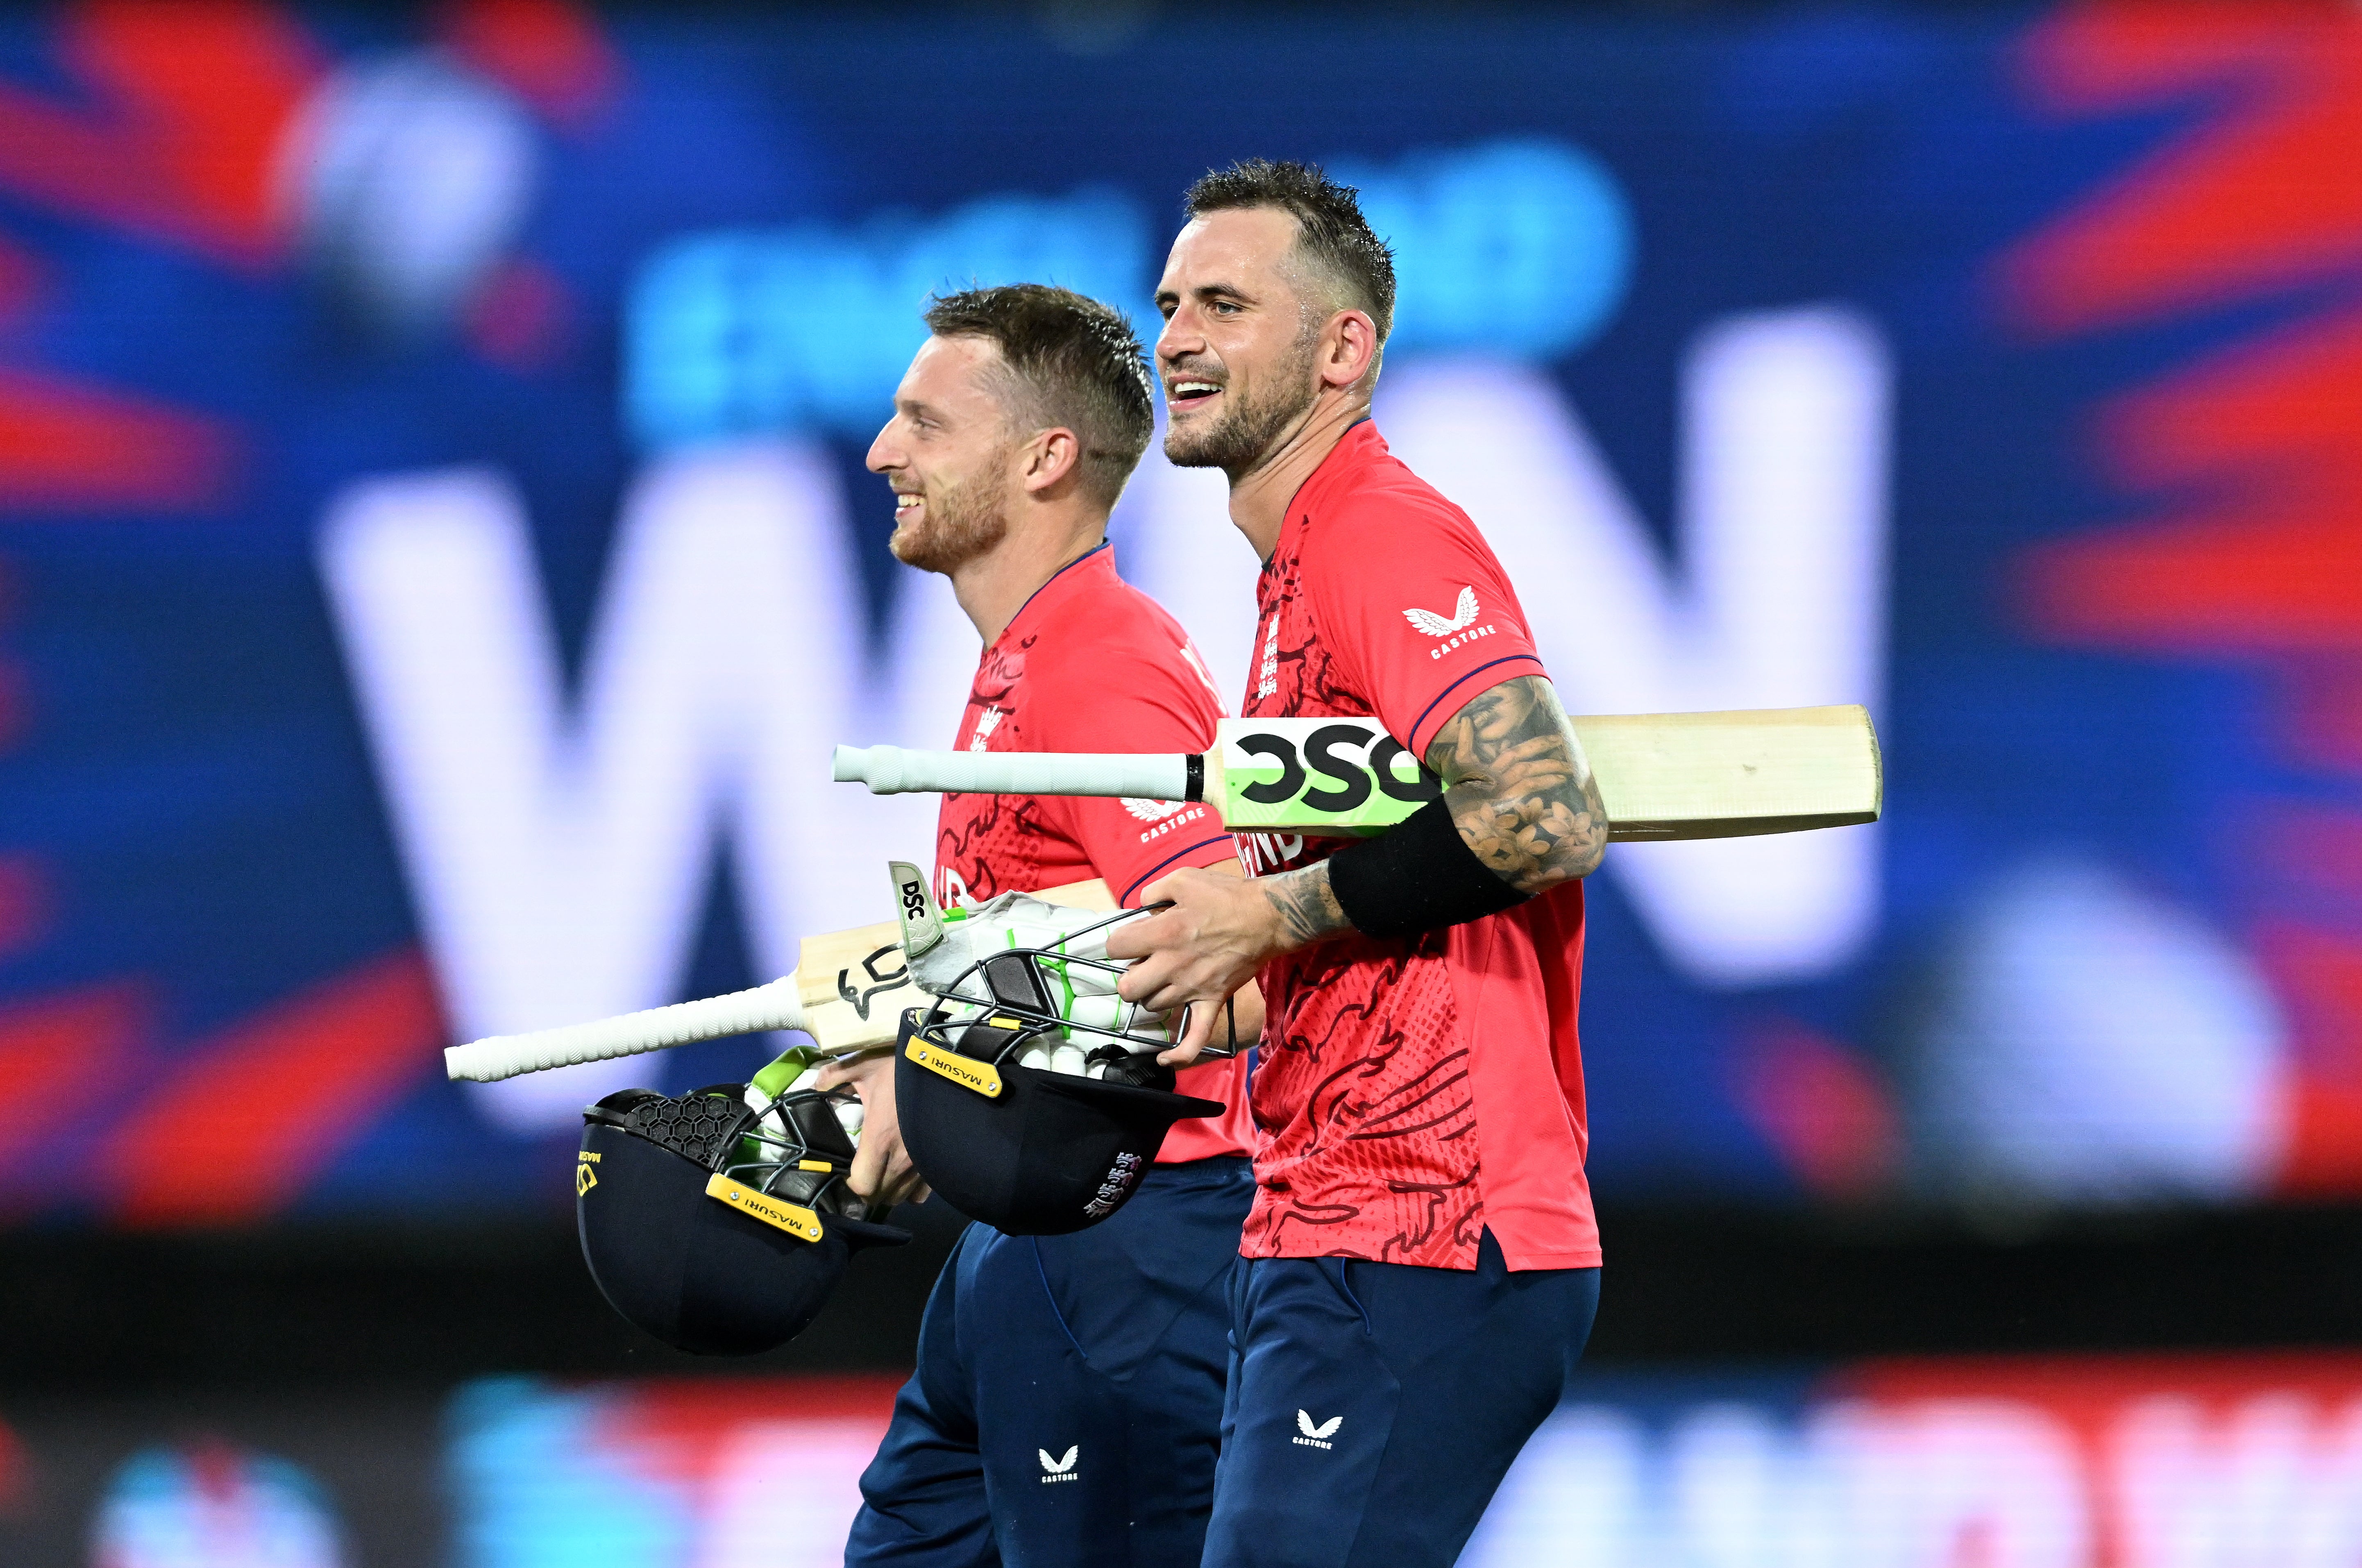 England face Pakistan in the T20 World Cup final on Sunday